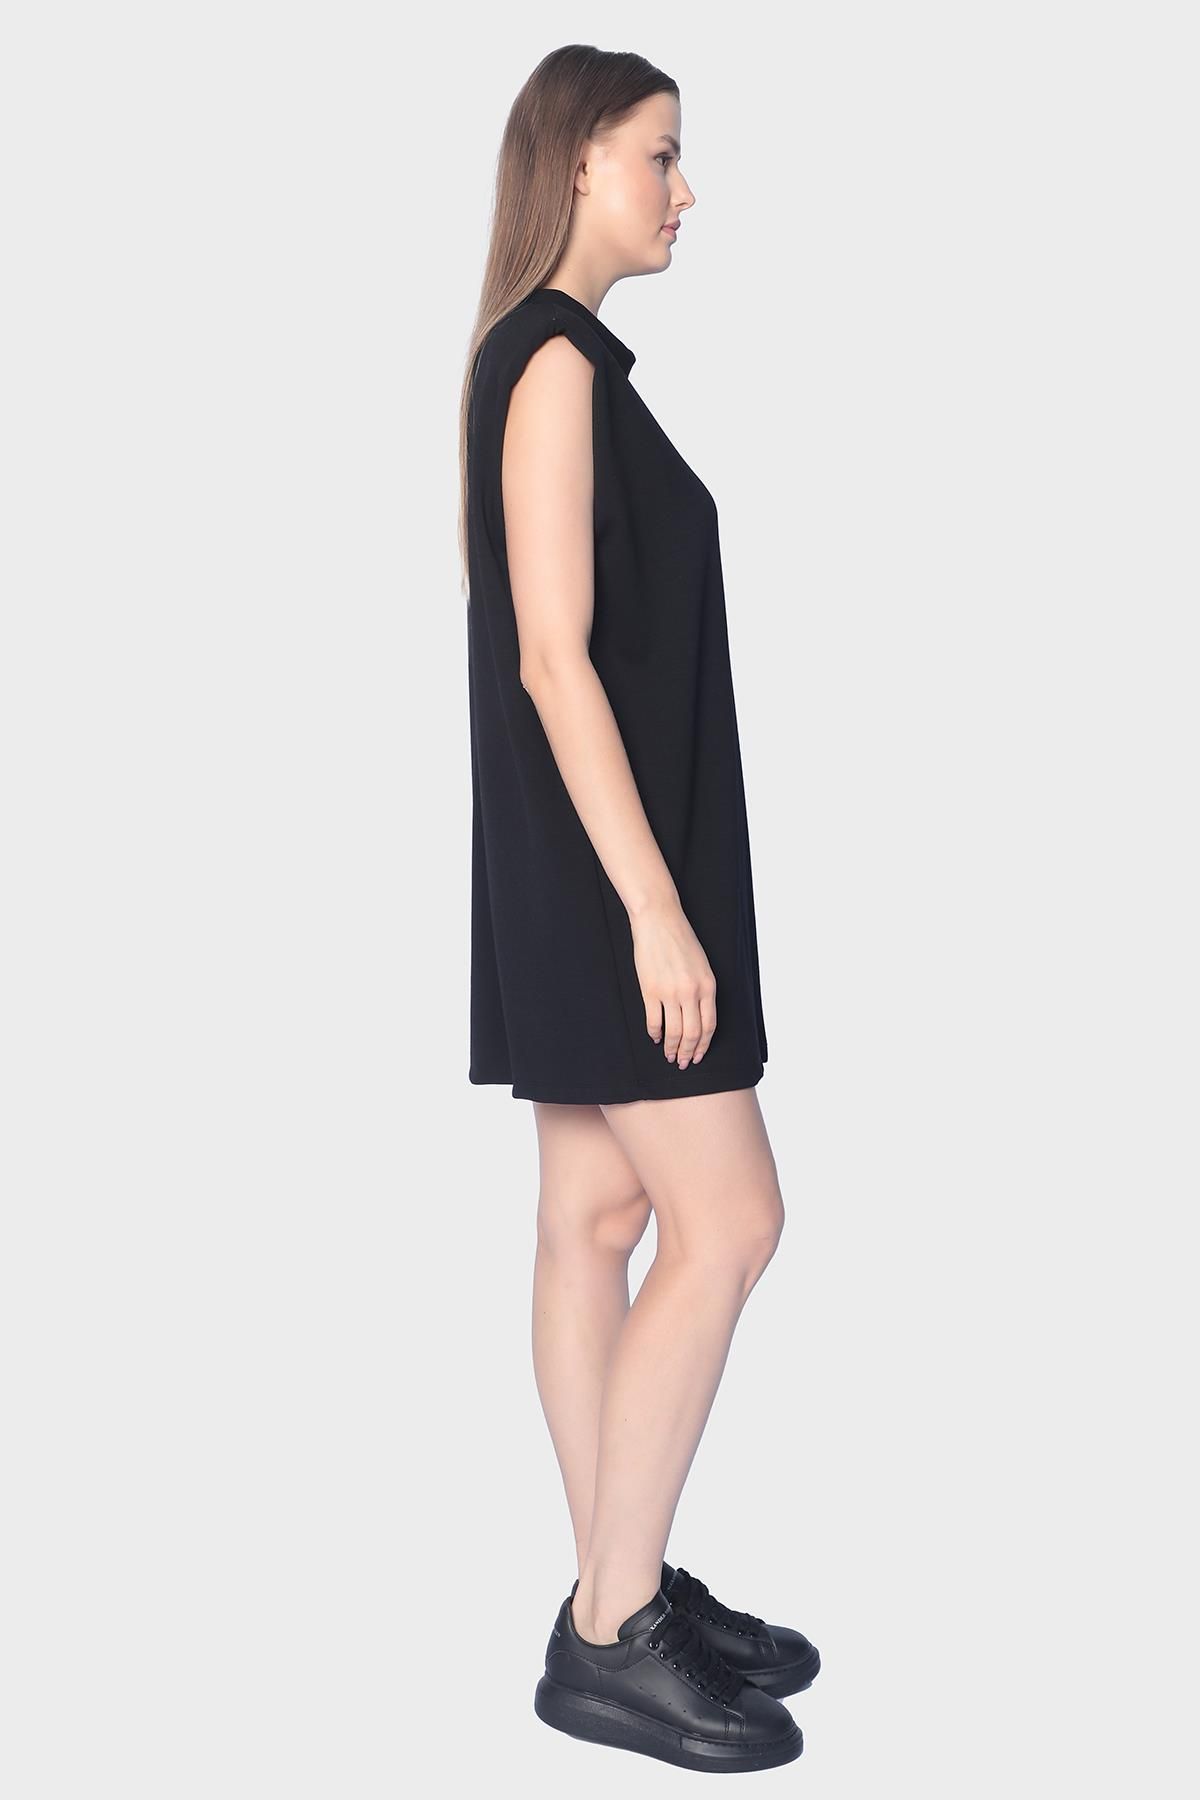 Sleeveless mini dress with oversized round neckline and shoulder support - Black